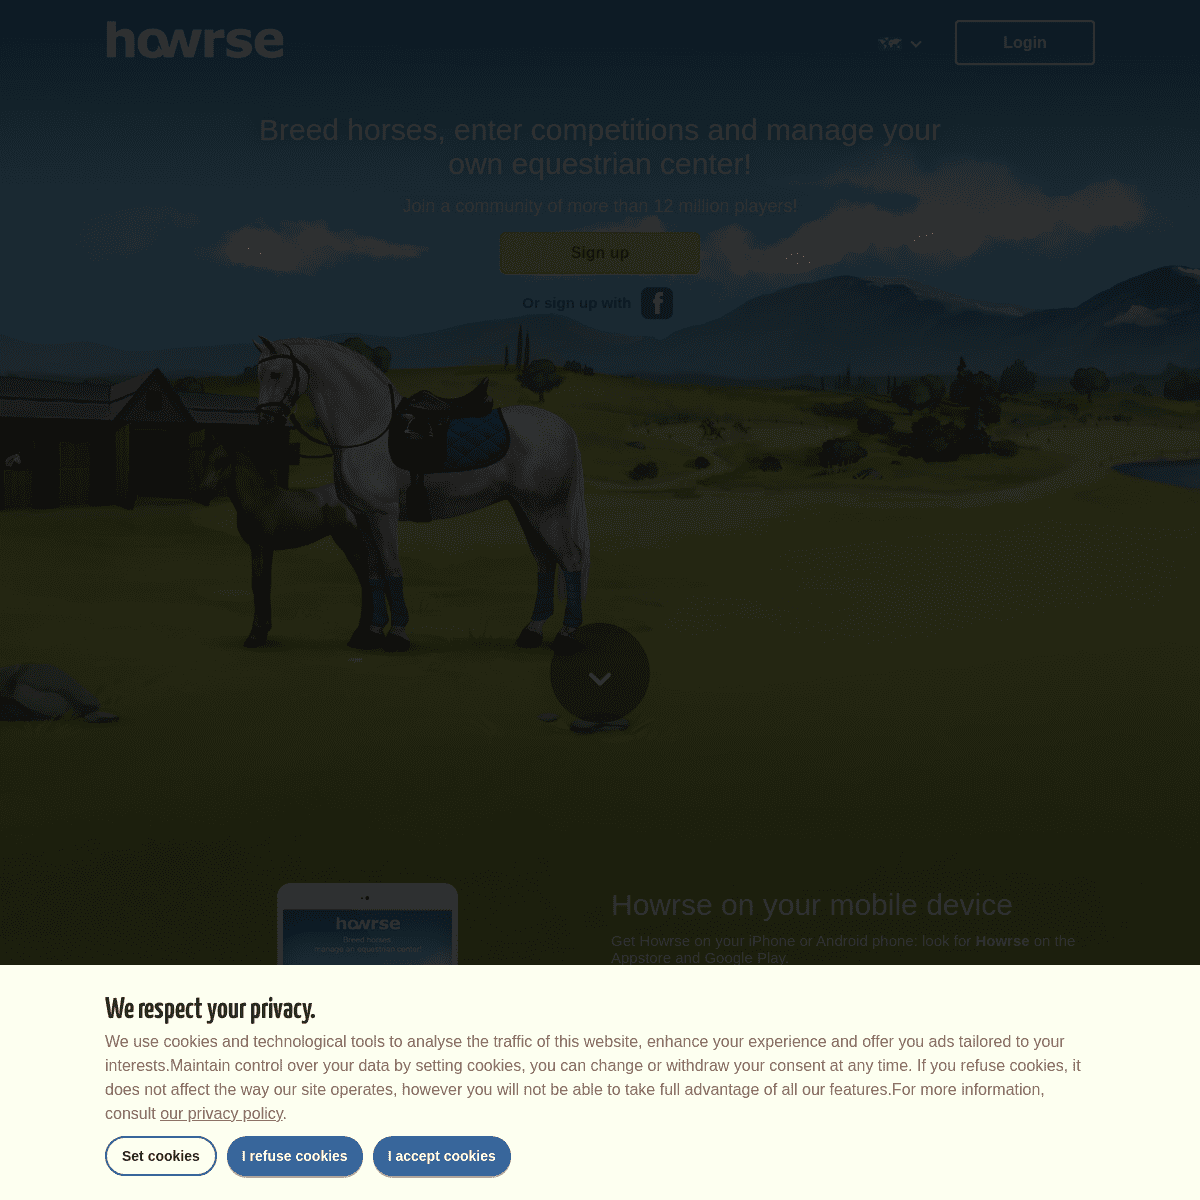 A complete backup of https://howrse.com